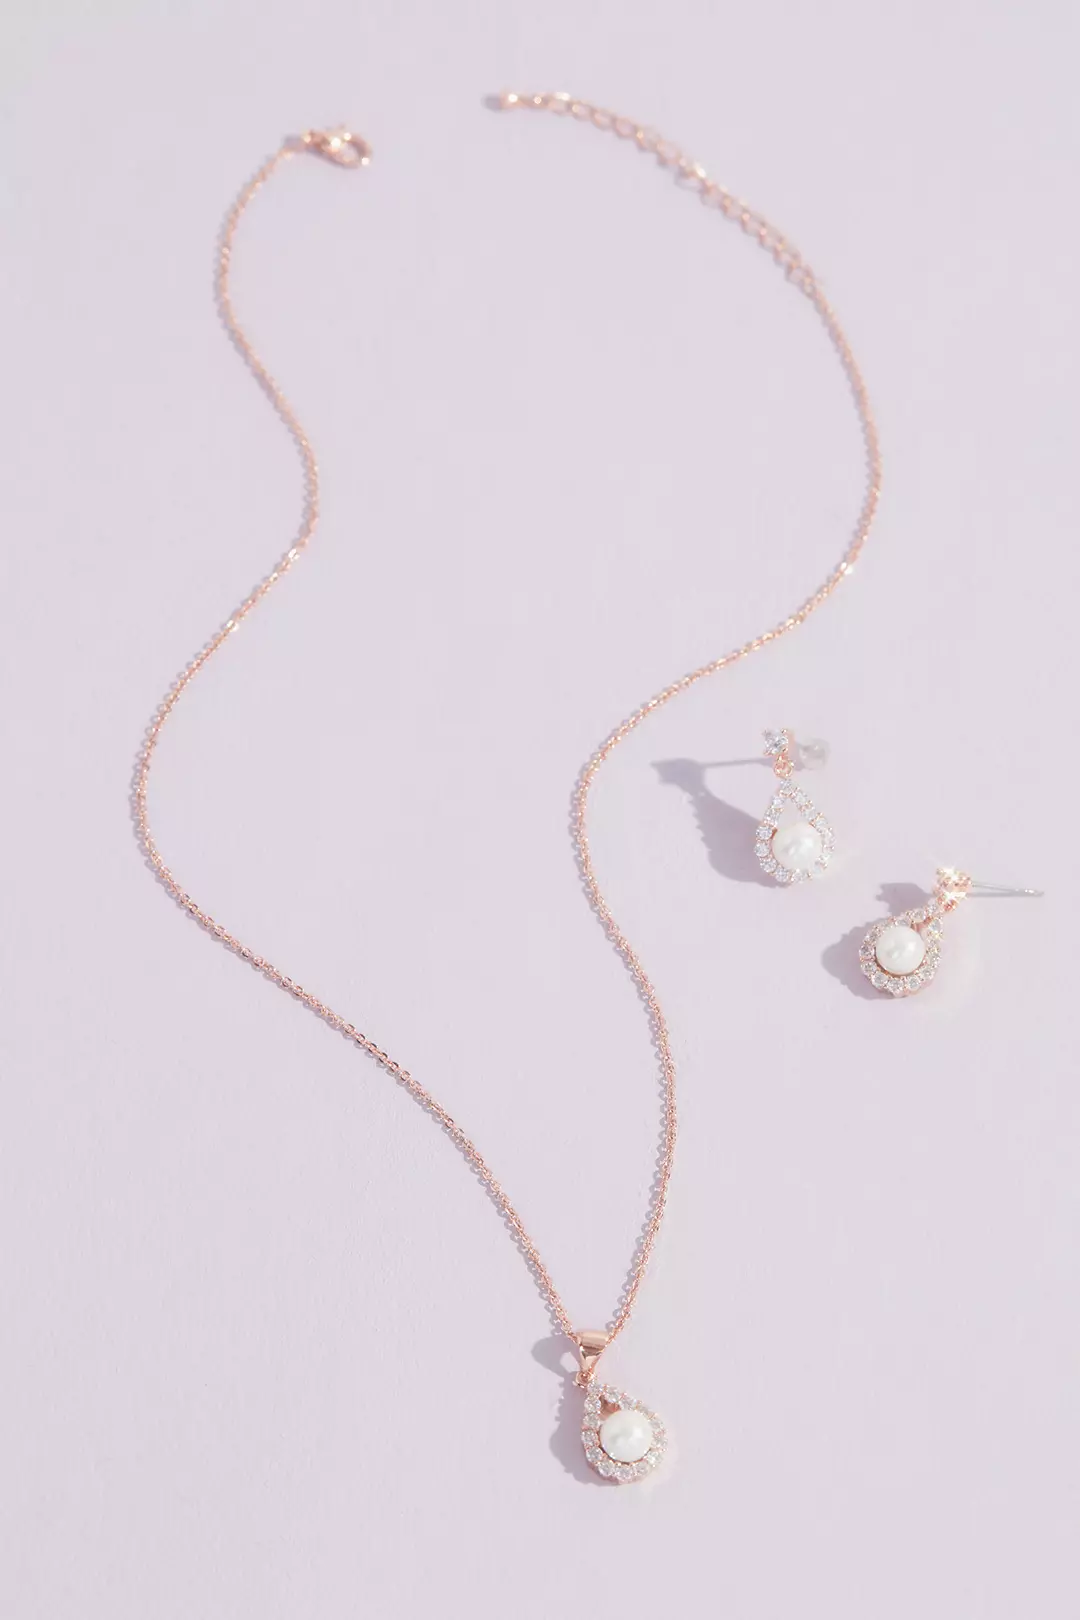 Haloed Faux Pearl Necklace and Earring Set Image